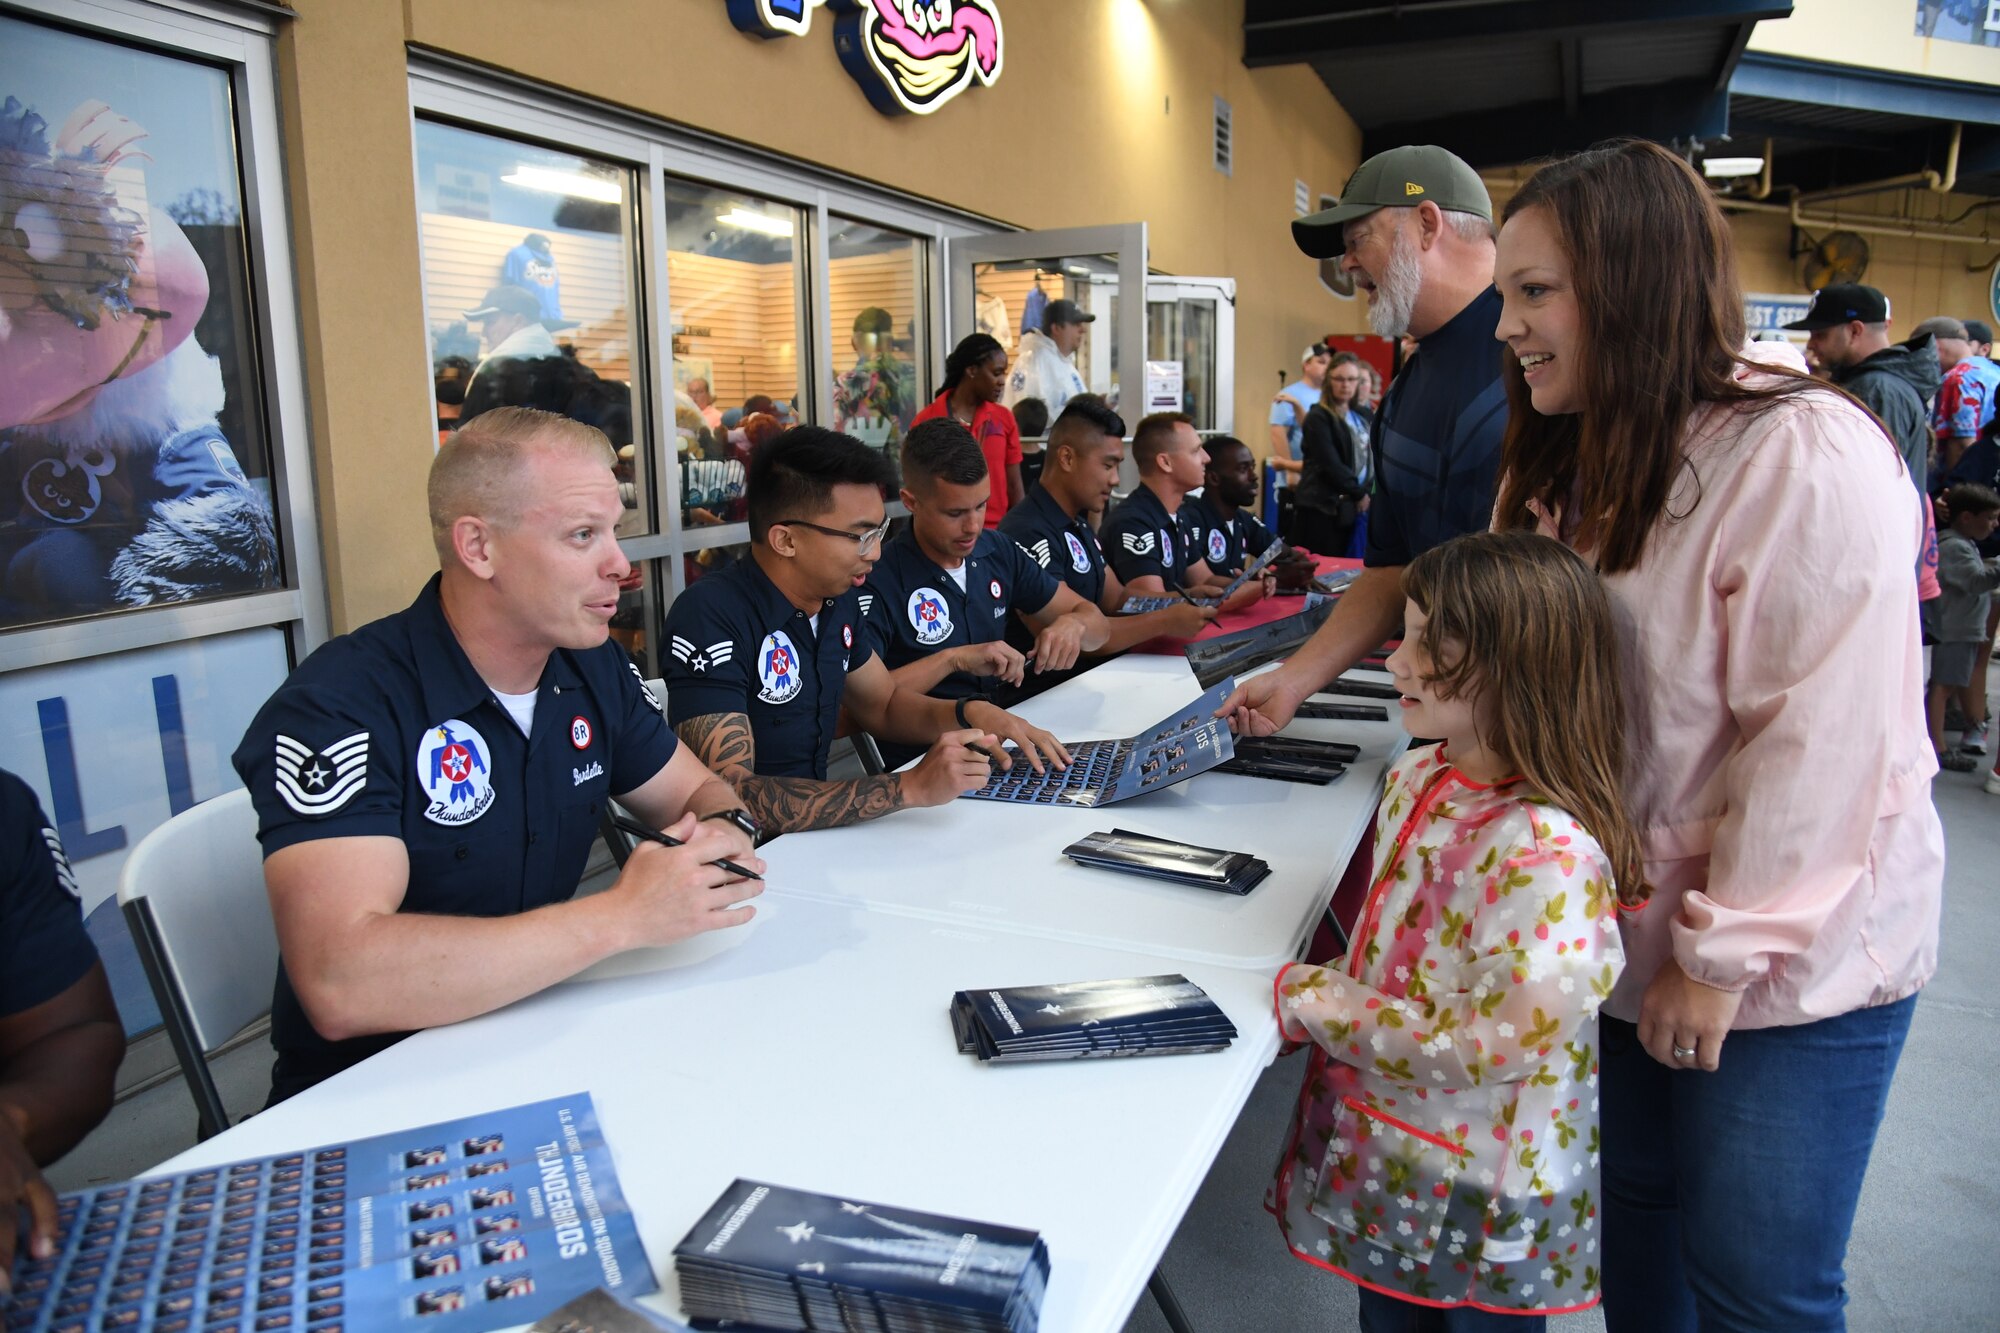 Guests attend the Thunderbird meet and greet at the Biloxi Shuckers baseball game in Biloxi, Mississippi, April 29, 2023.